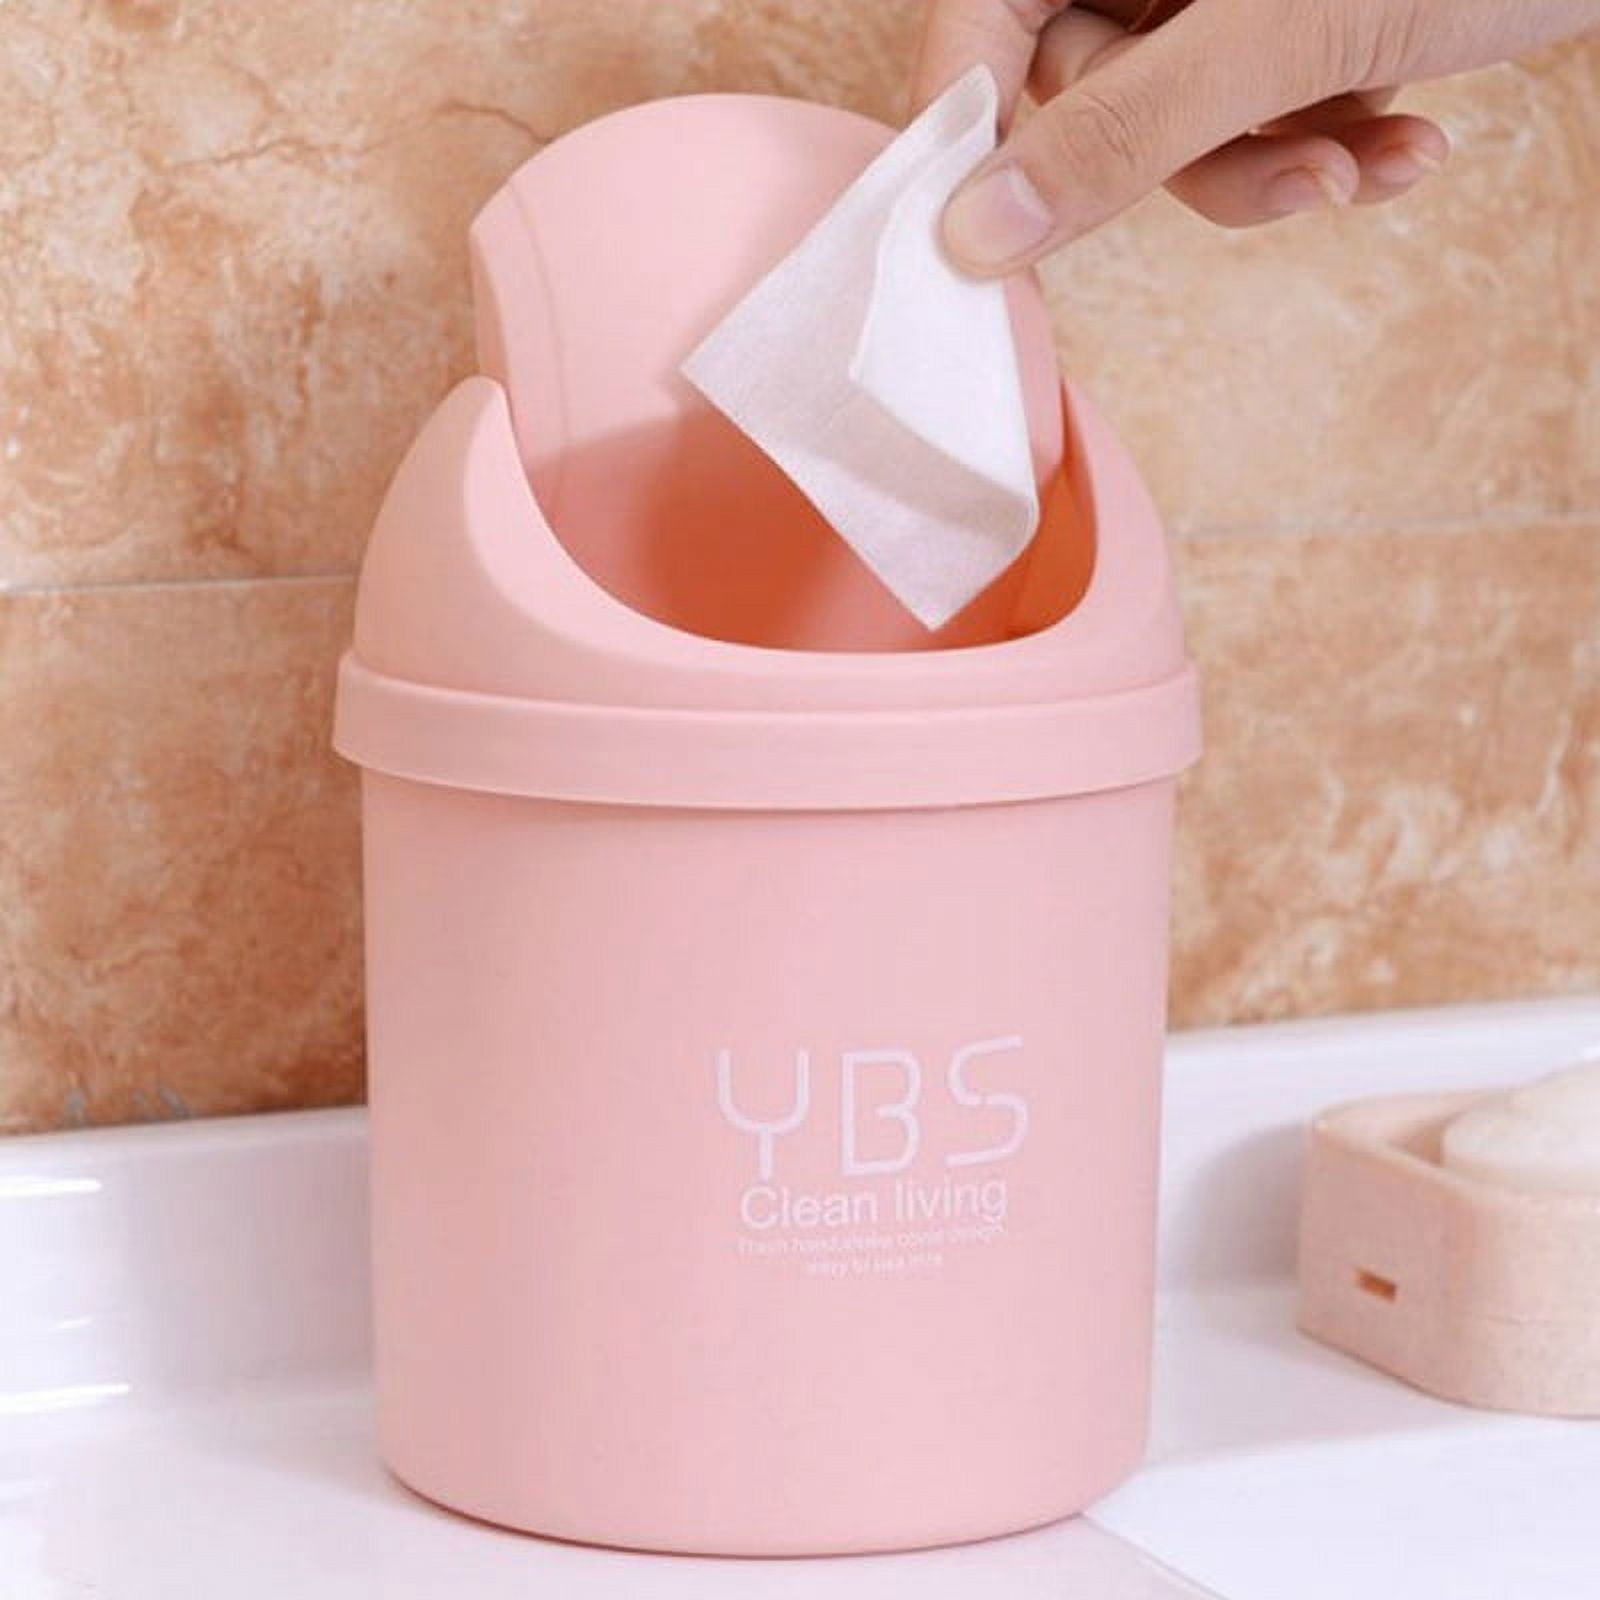 Mini Desktop Bin Small Trash Can Tube With Cover Bedroom Trash Garbage Can  Clean Workspace Kitchen Storage Box Home Desk Dustbin